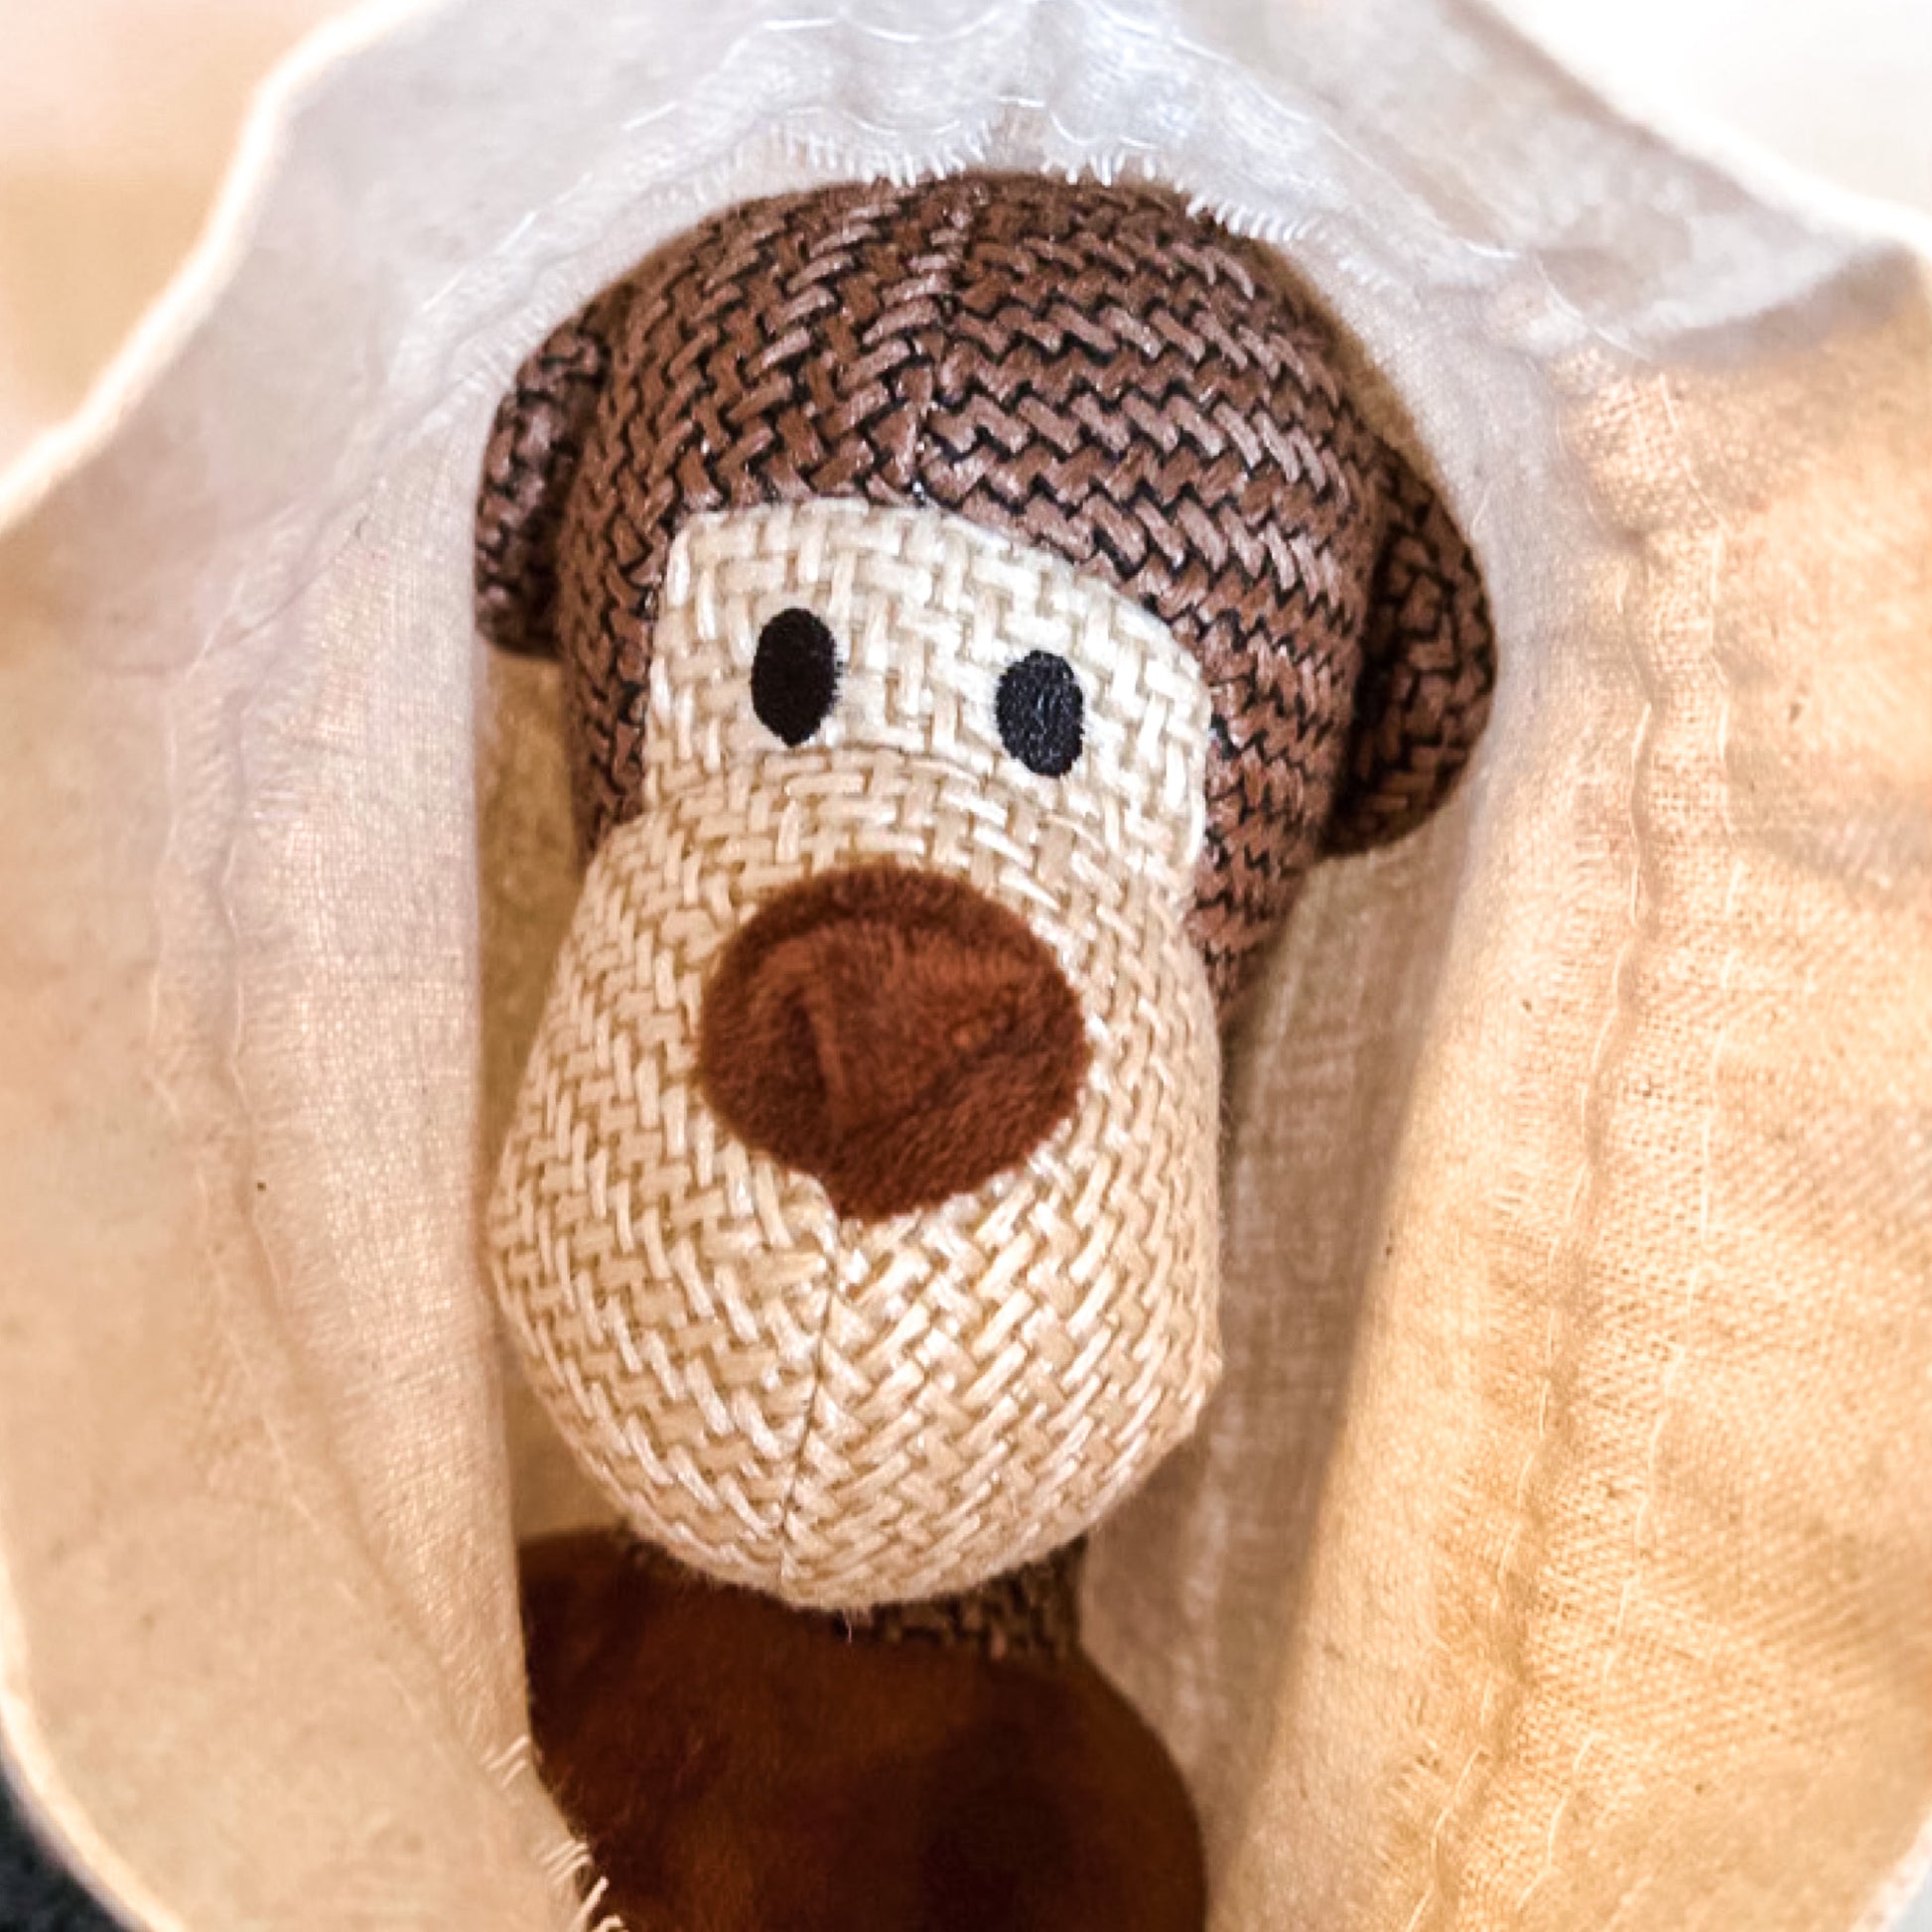 monkey dog toy from Border Loves in sustainable cotton gift bag